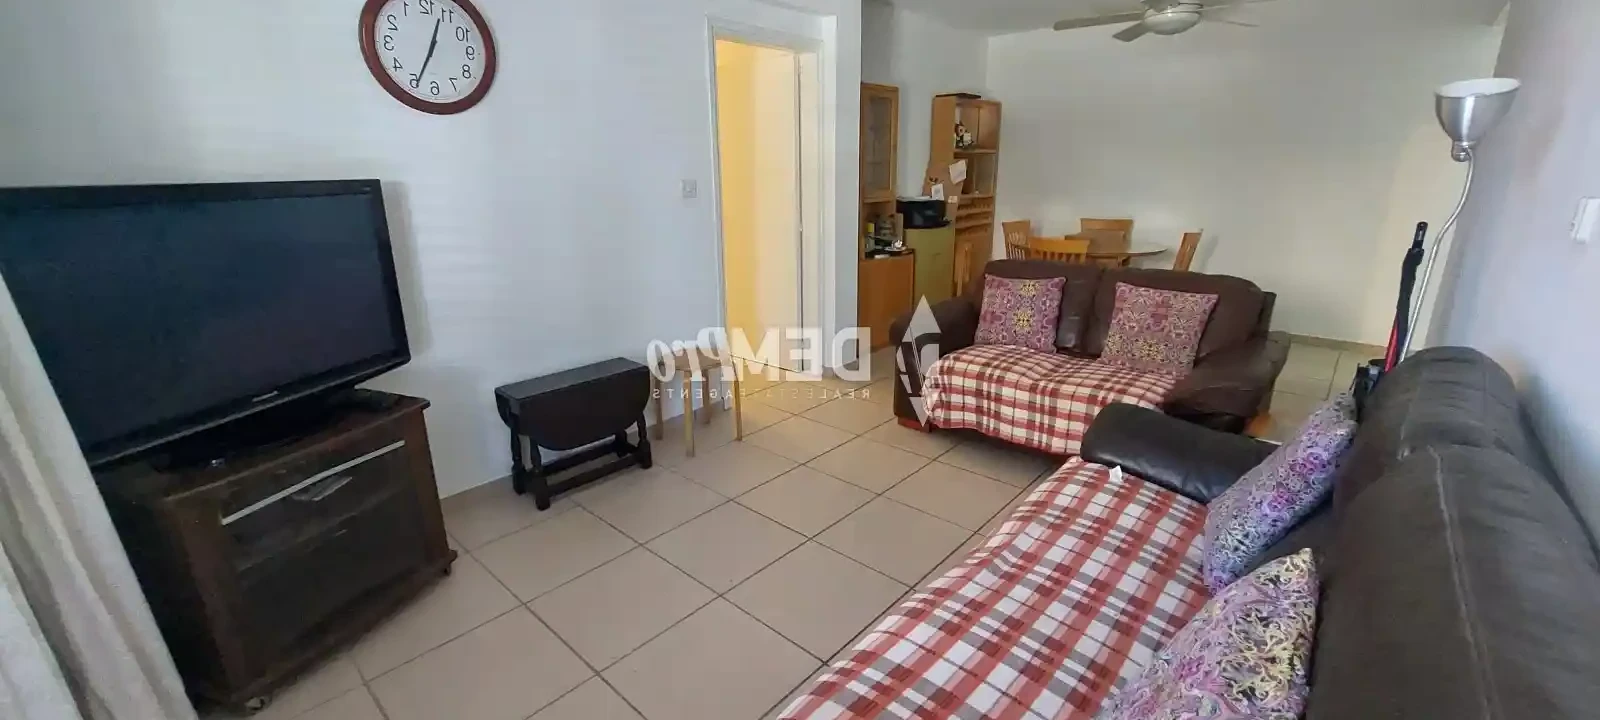 3-bedroom apartment fоr sаle €205.000, image 1